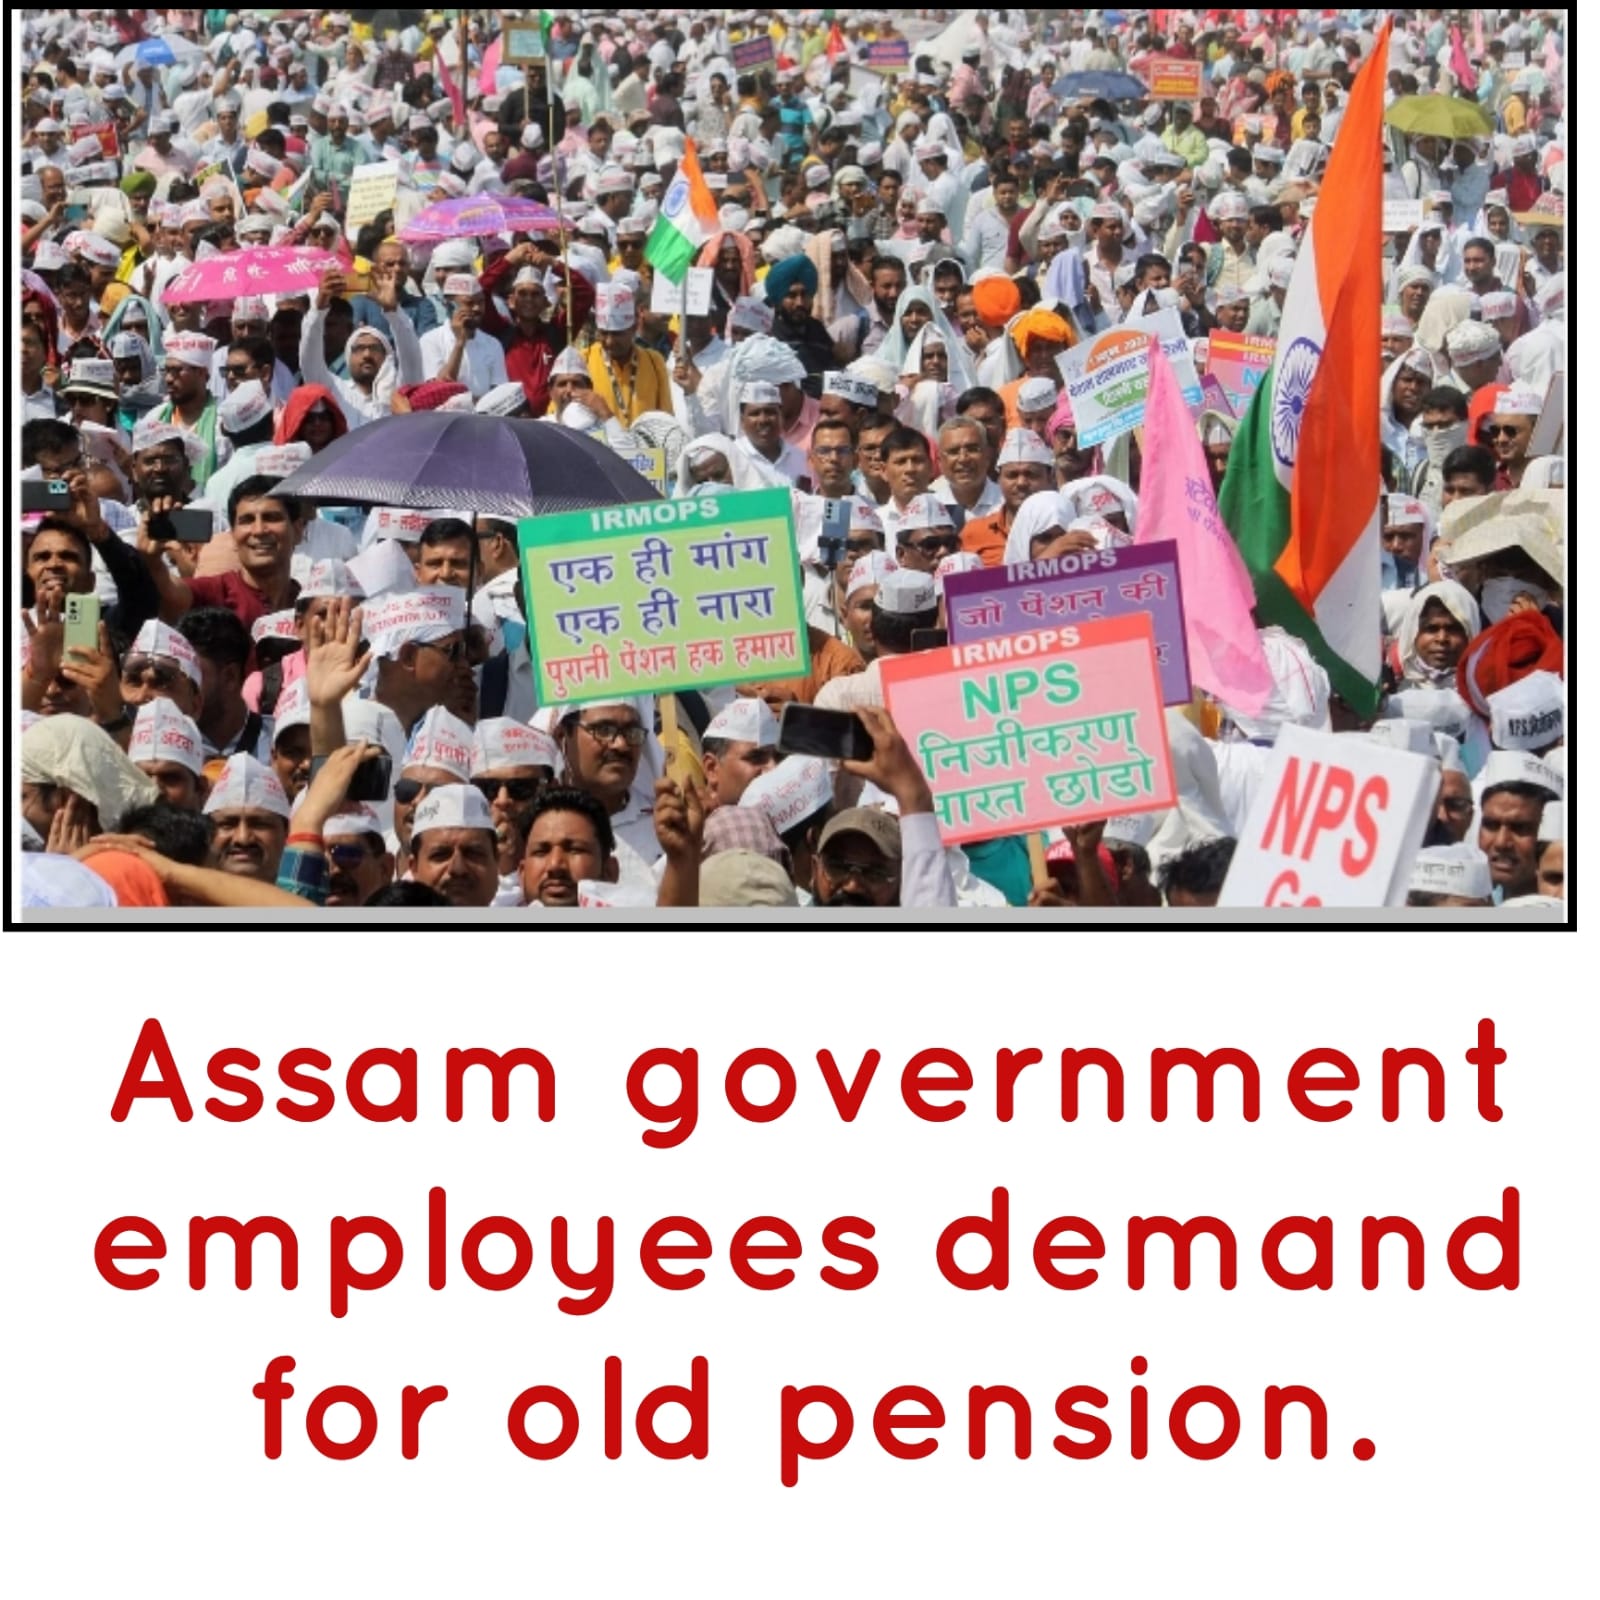 Assam government employees demand for old pension